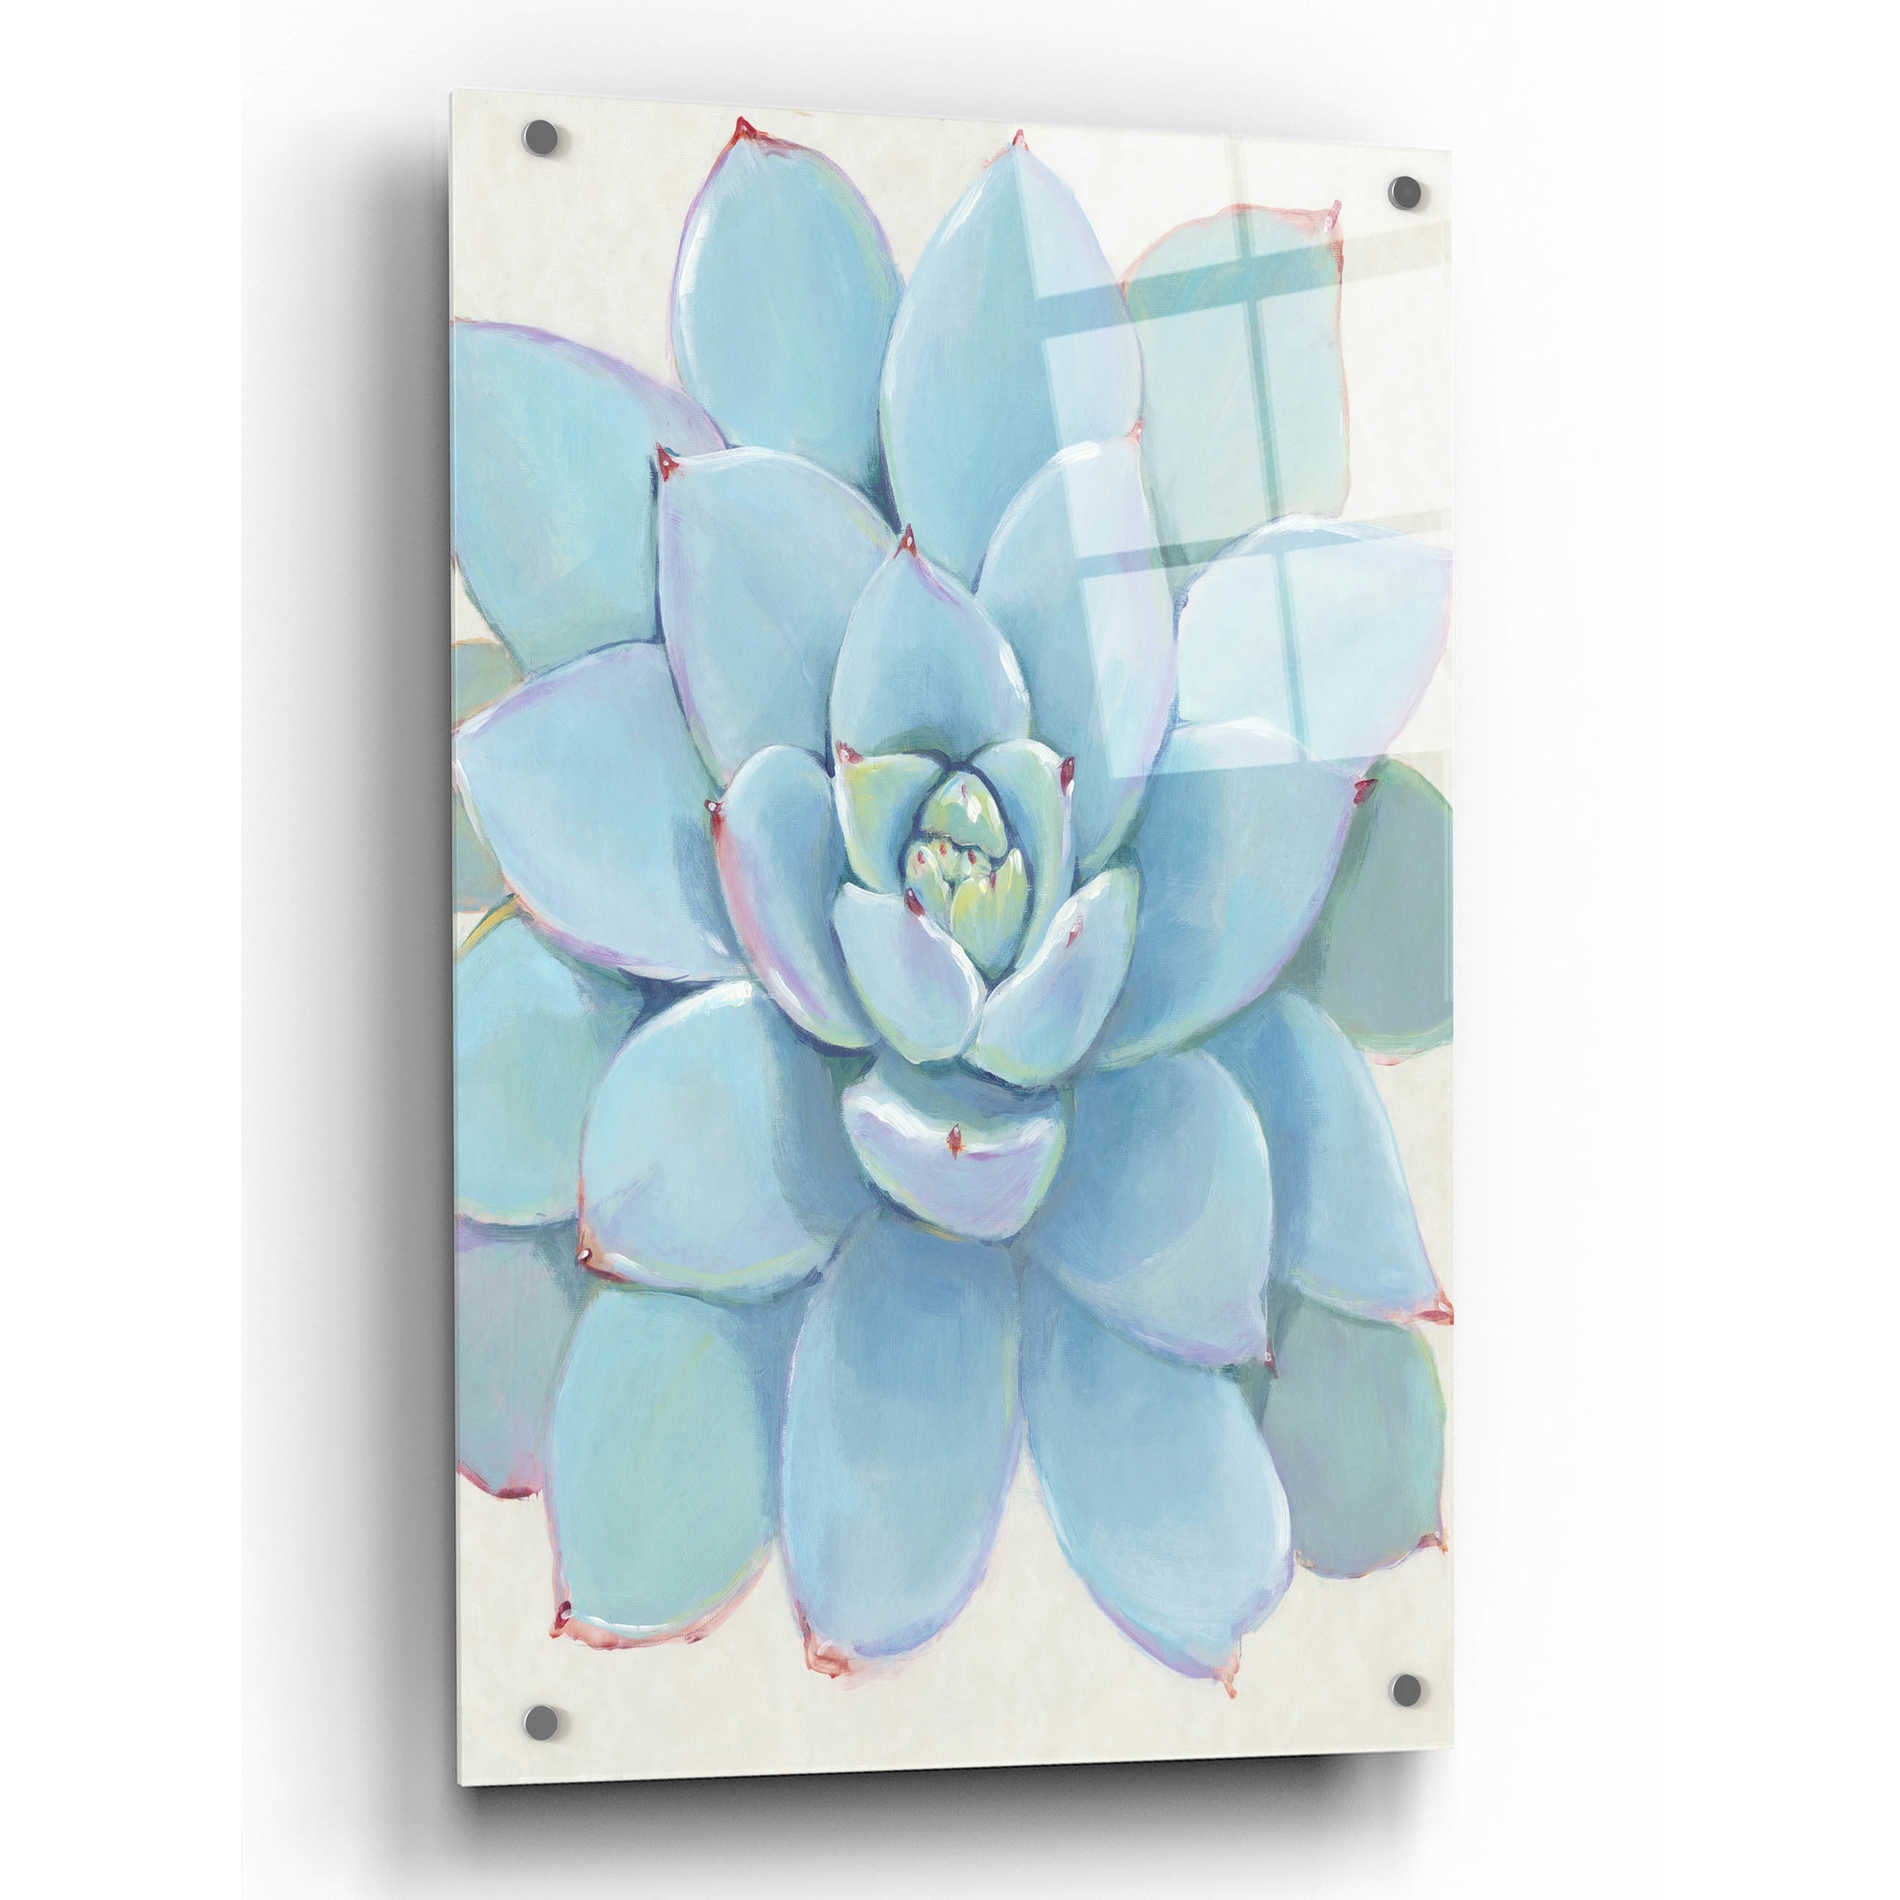 Epic Art 'Pastel Succulent I' by Tim O'Toole, Acrylic Glass Wall Art,24x36